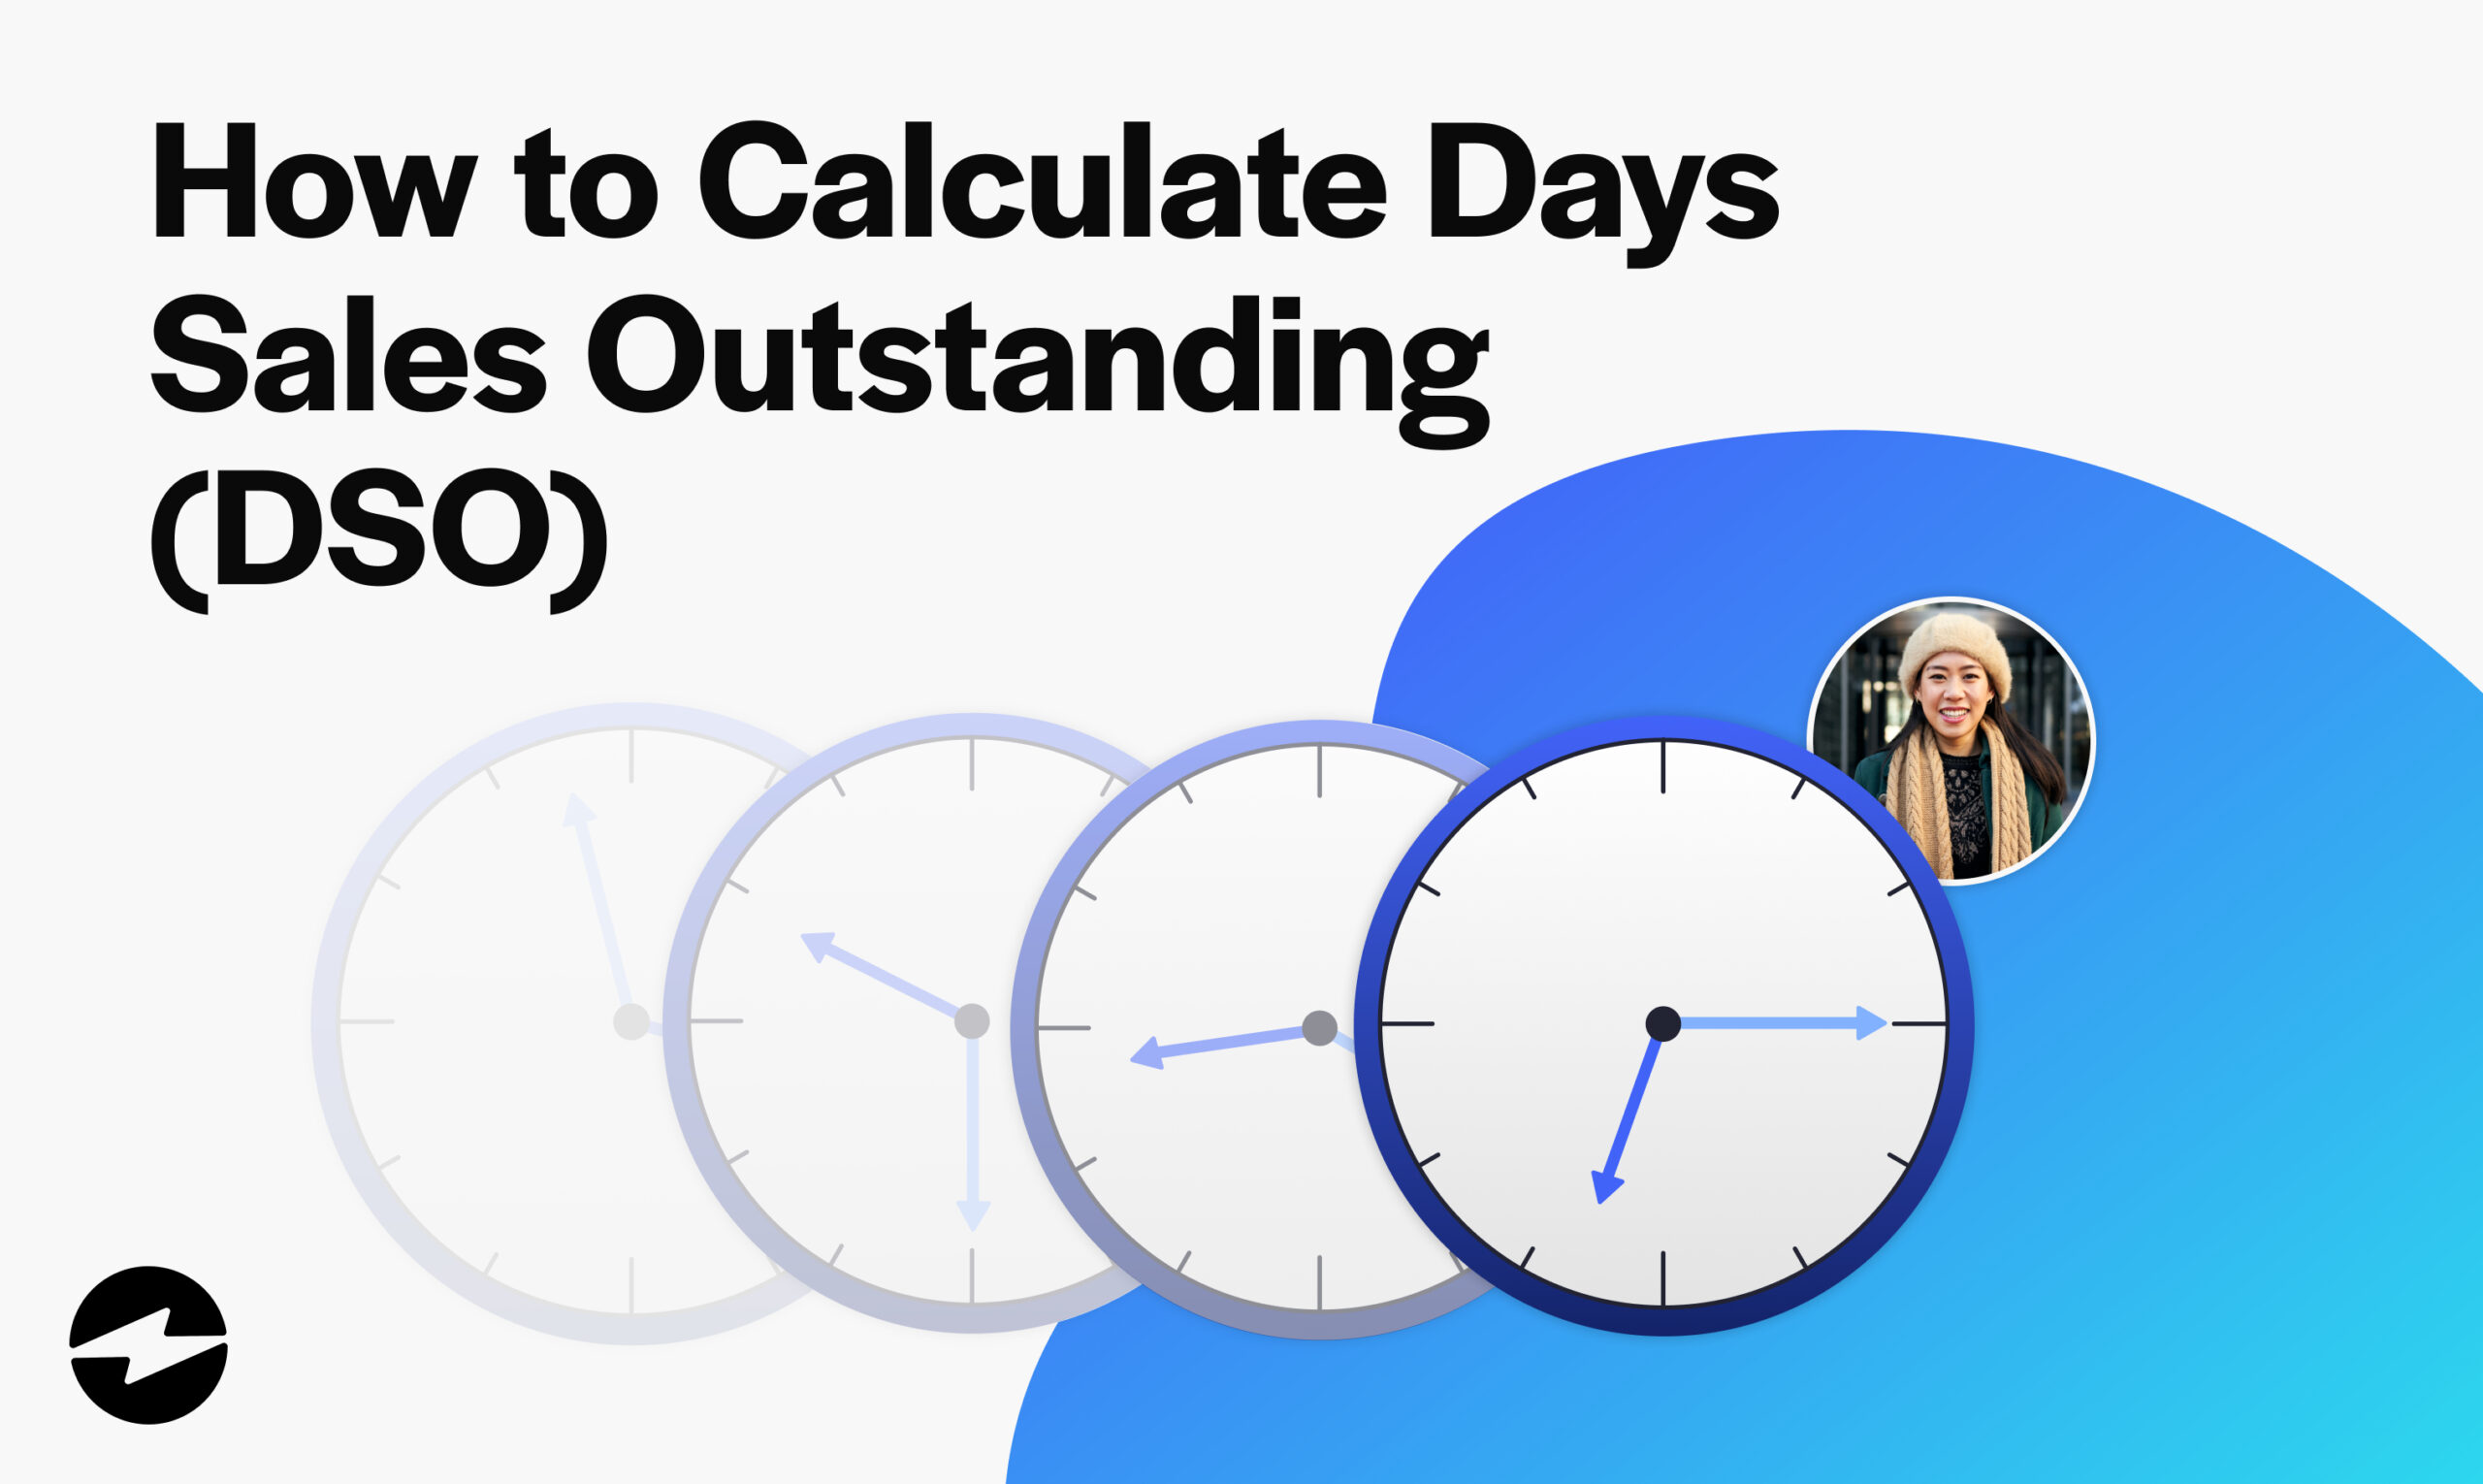 How to Calculate Days Sales Outstanding (DSO)